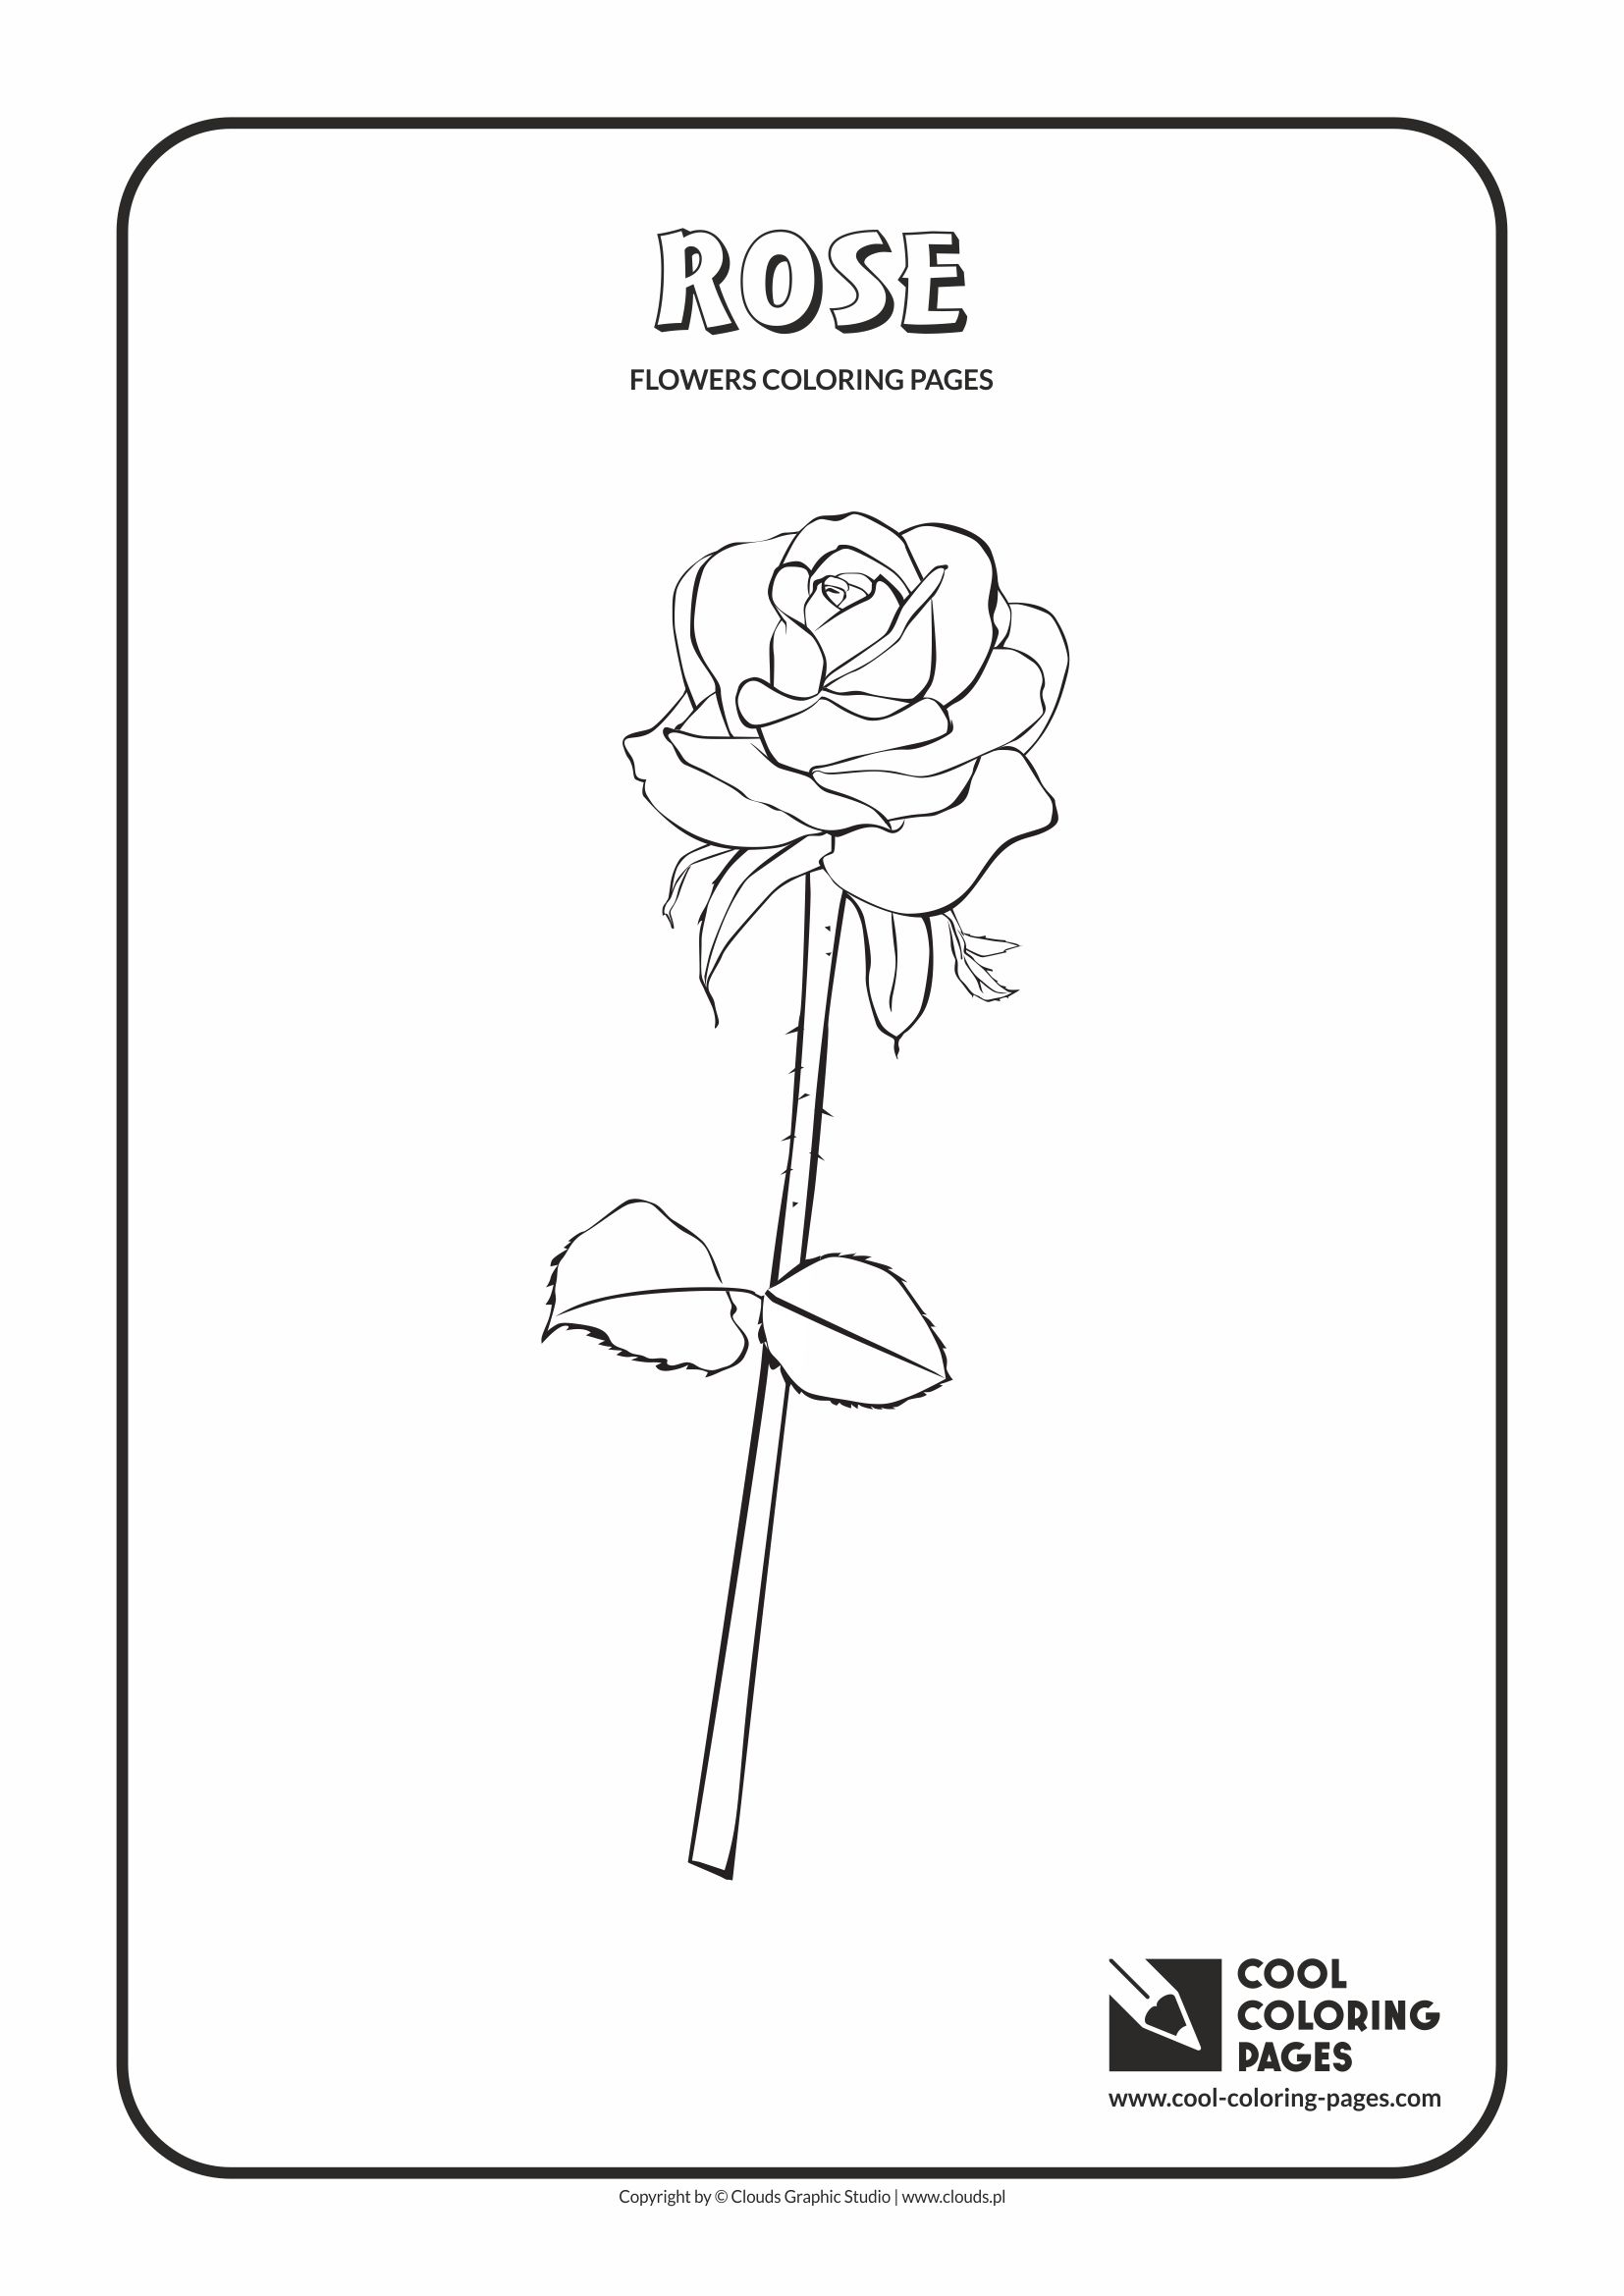 Cool Coloring Pages - Plants / Rose / Coloring page with rose